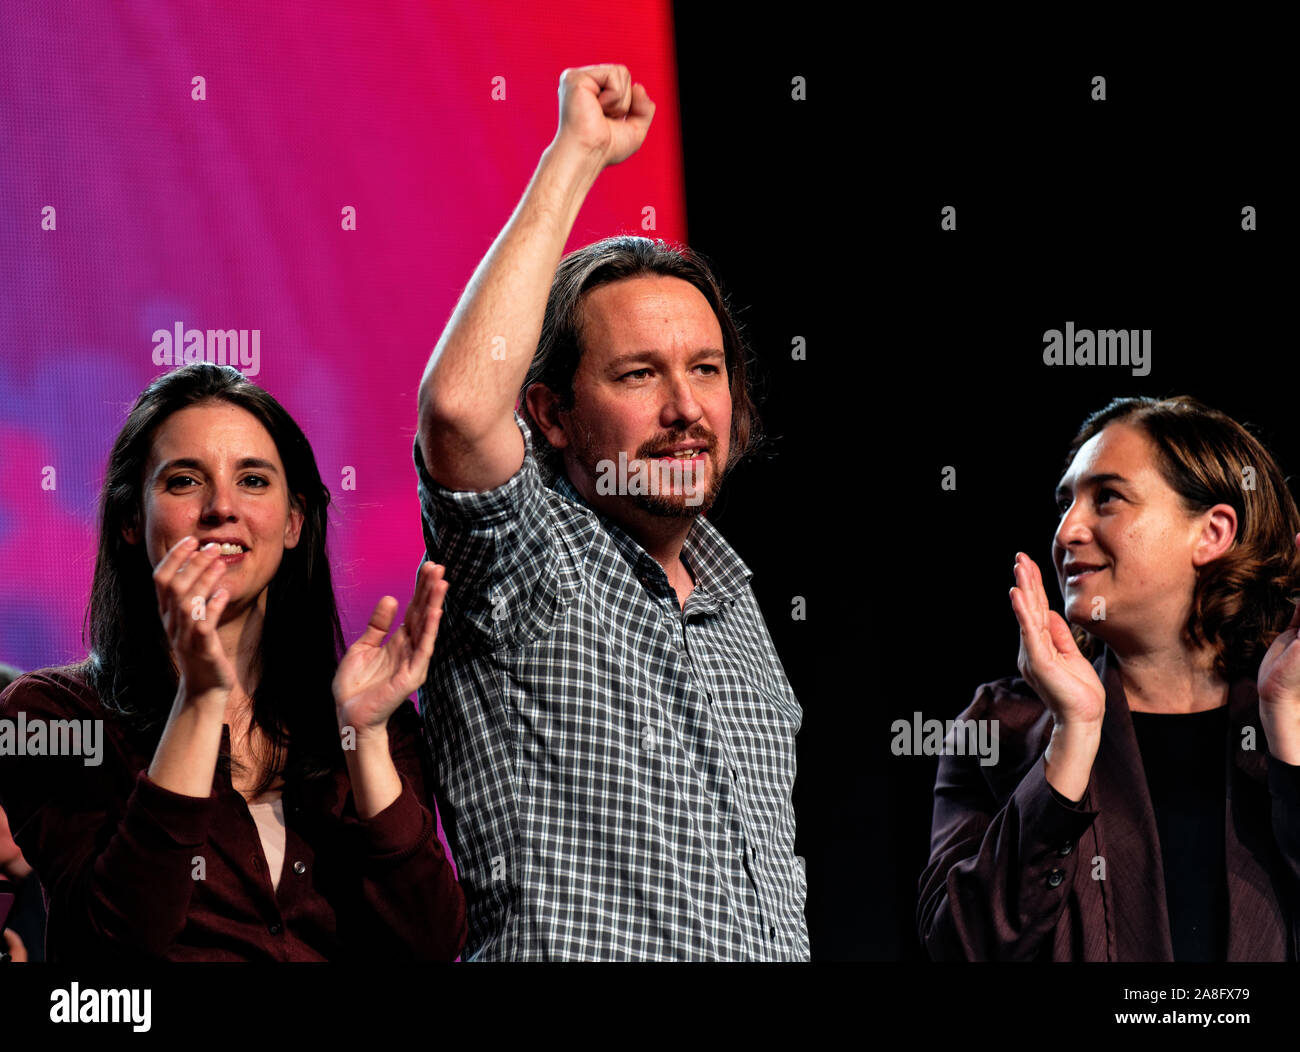 IFEMA, Madrid, Spain. 08th November, 2019. L to R Irene Montero, spokesperson for Unidas Podemos in the Congress of Deputies and candidate for Madrid, Pablo Iglesias, secretary general of Podemos and candidate of Unidas Podemos for the Presidency of the Government, Ada Colau, mayor of Barcelona, at the last event of Unidas Podemos party before the campaign closure for the General Elections in Spain. Credit: EnriquePSans/Alamy Live News Stock Photo